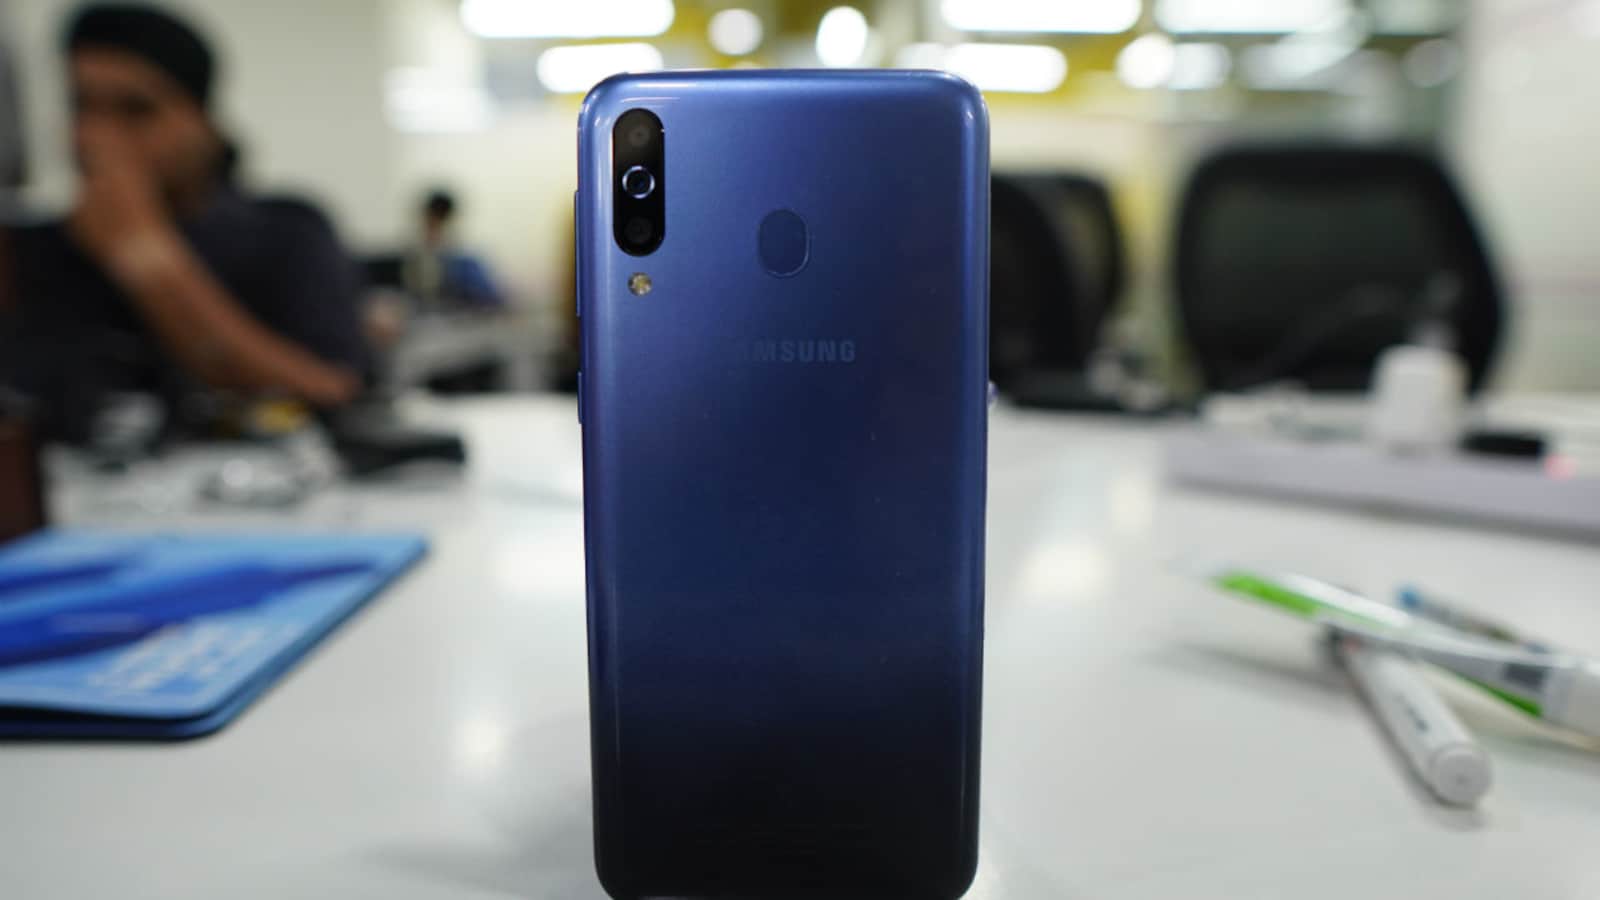 Samsung Galaxy M30s could feature 48MP main camera and 6,000 mAh battery